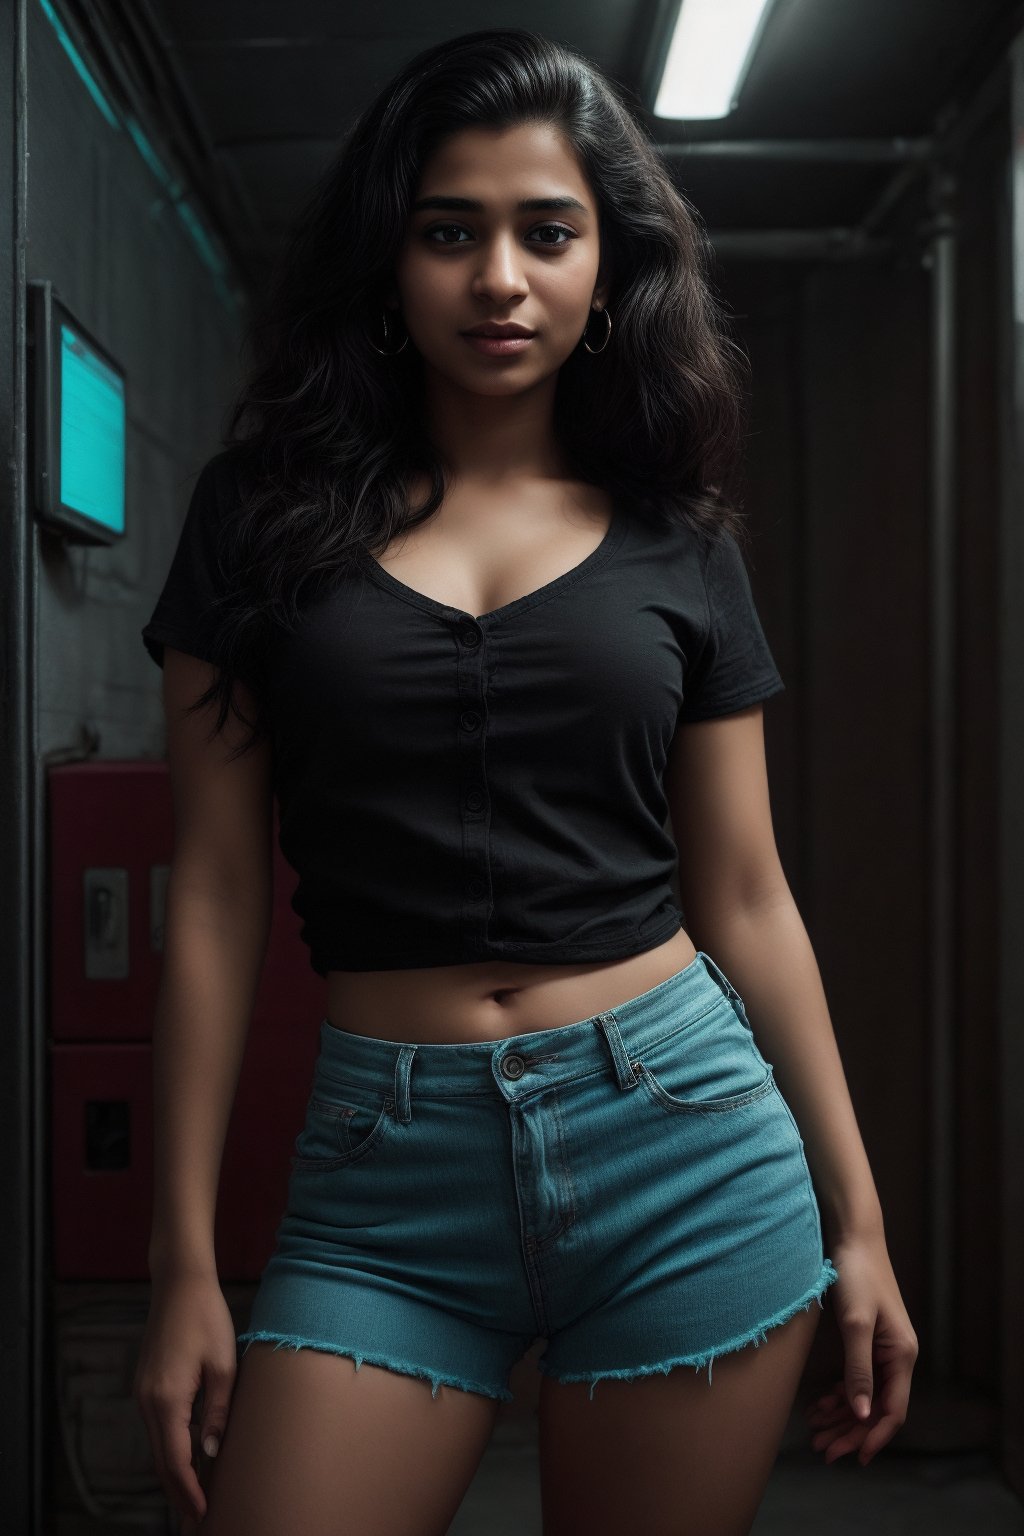 Cyberpunk, Neon glow, masterpiece, high resolution, best quality, 4k, plump face, 1girl, solo, beauty photo, amateur photo, 1girl, eye level, oversized button-up shirt, and hoop earrings, Teal-colored Flat ironed straight, stand pose in locker room,lighting,photorealistic,Curly girl ,redneonstyle,Rebecca ,Mallu girl ,Tamil girl